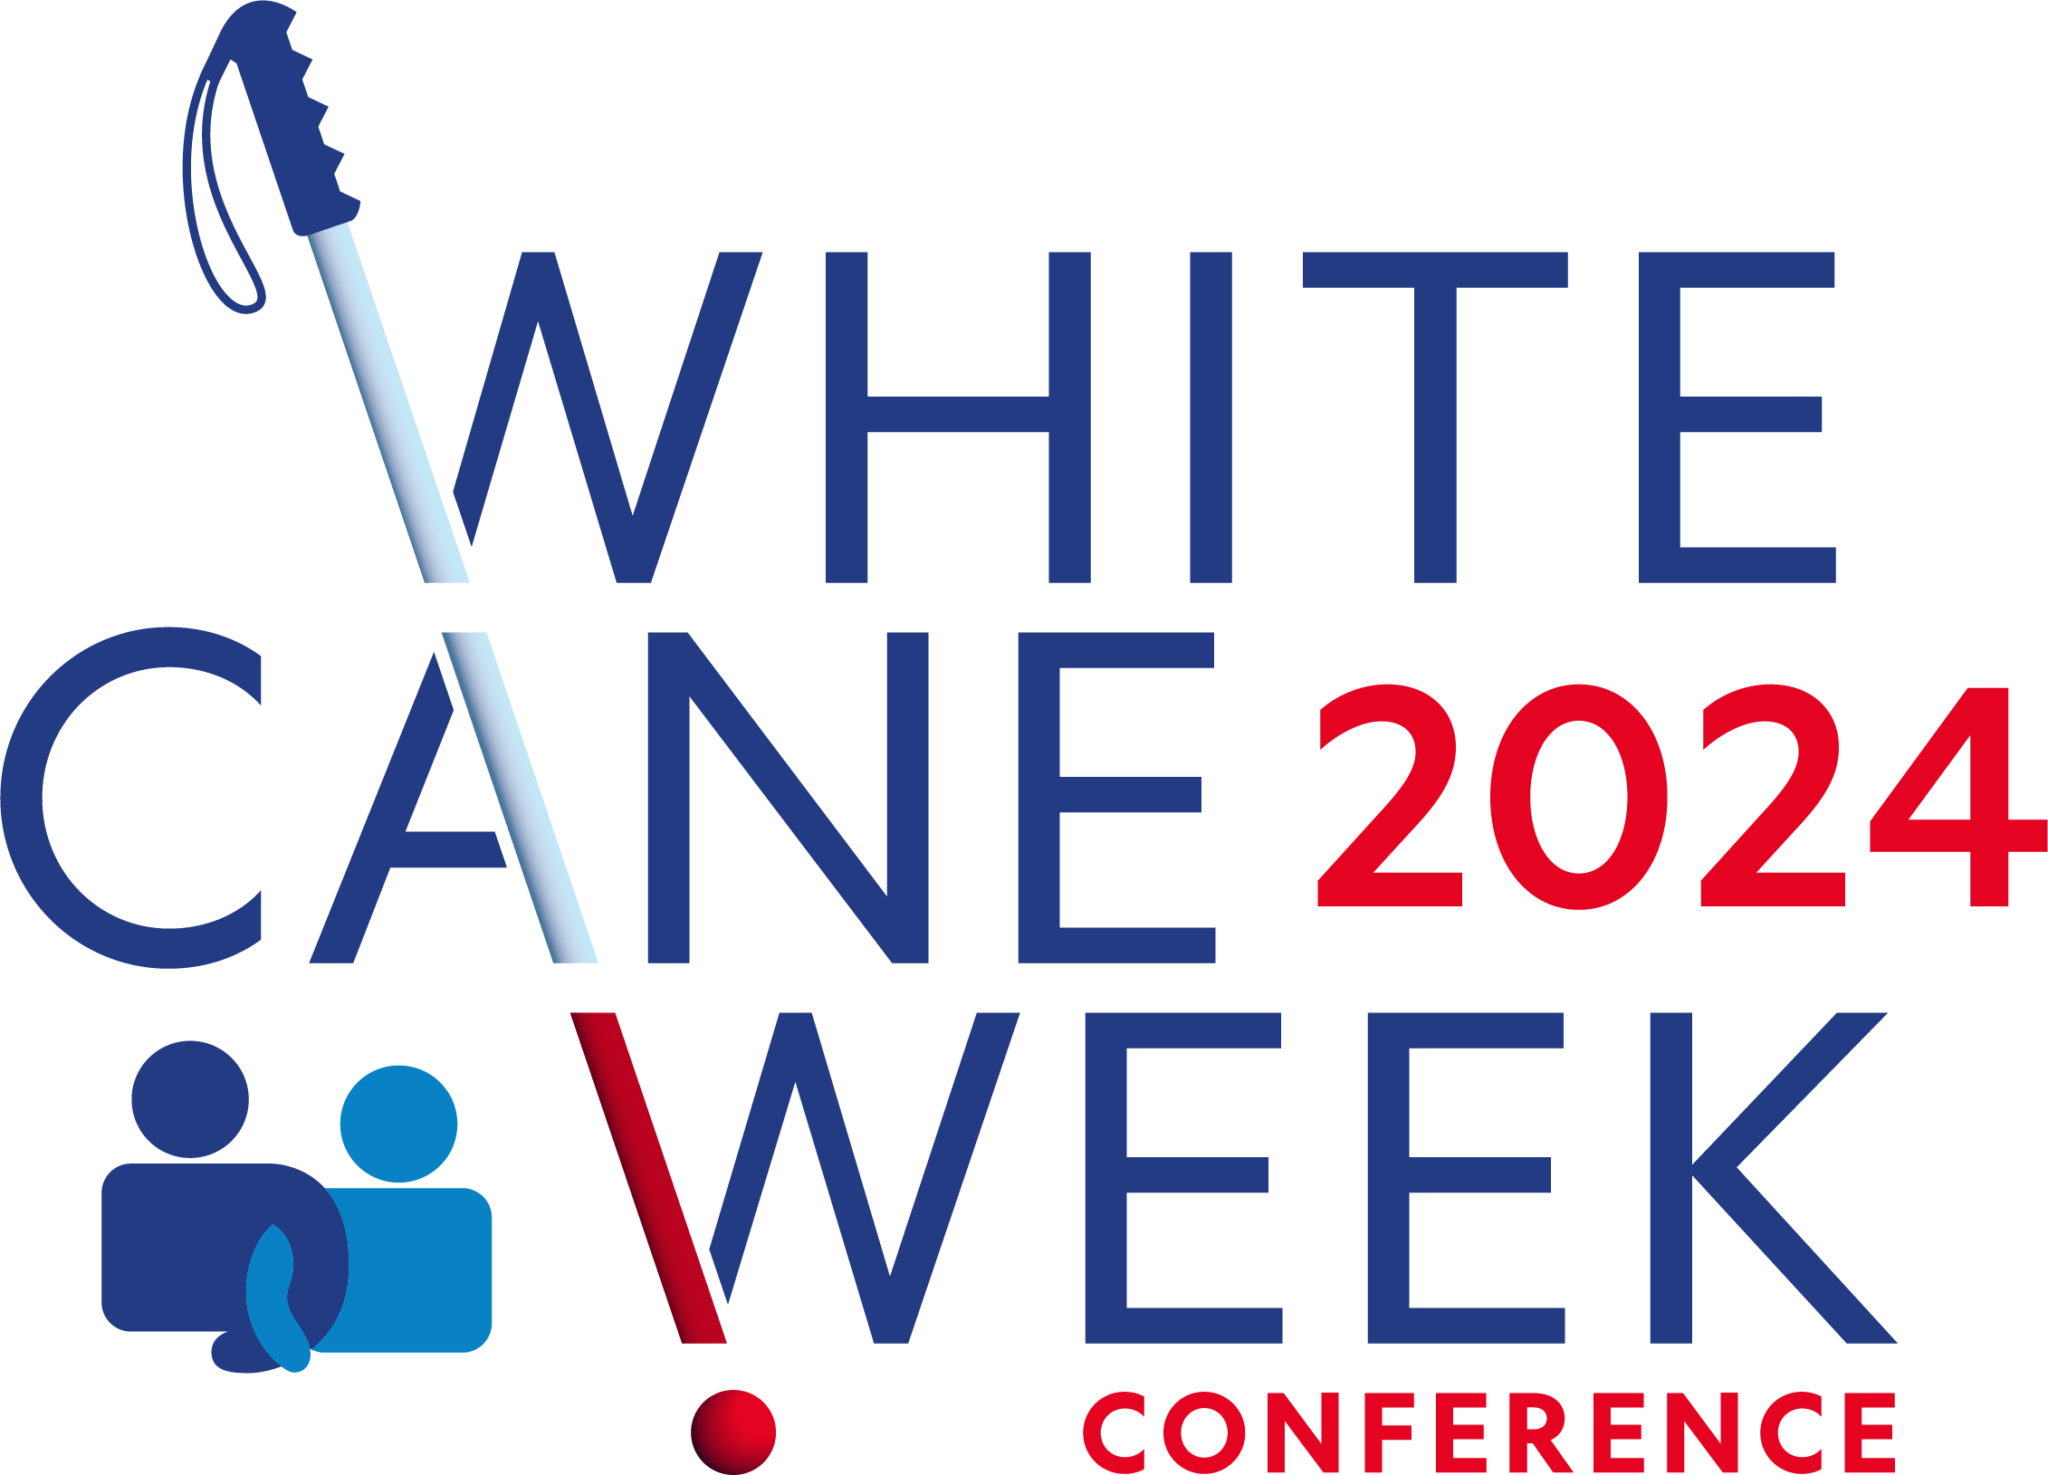 White Cane Week Canadian Council of the Blind